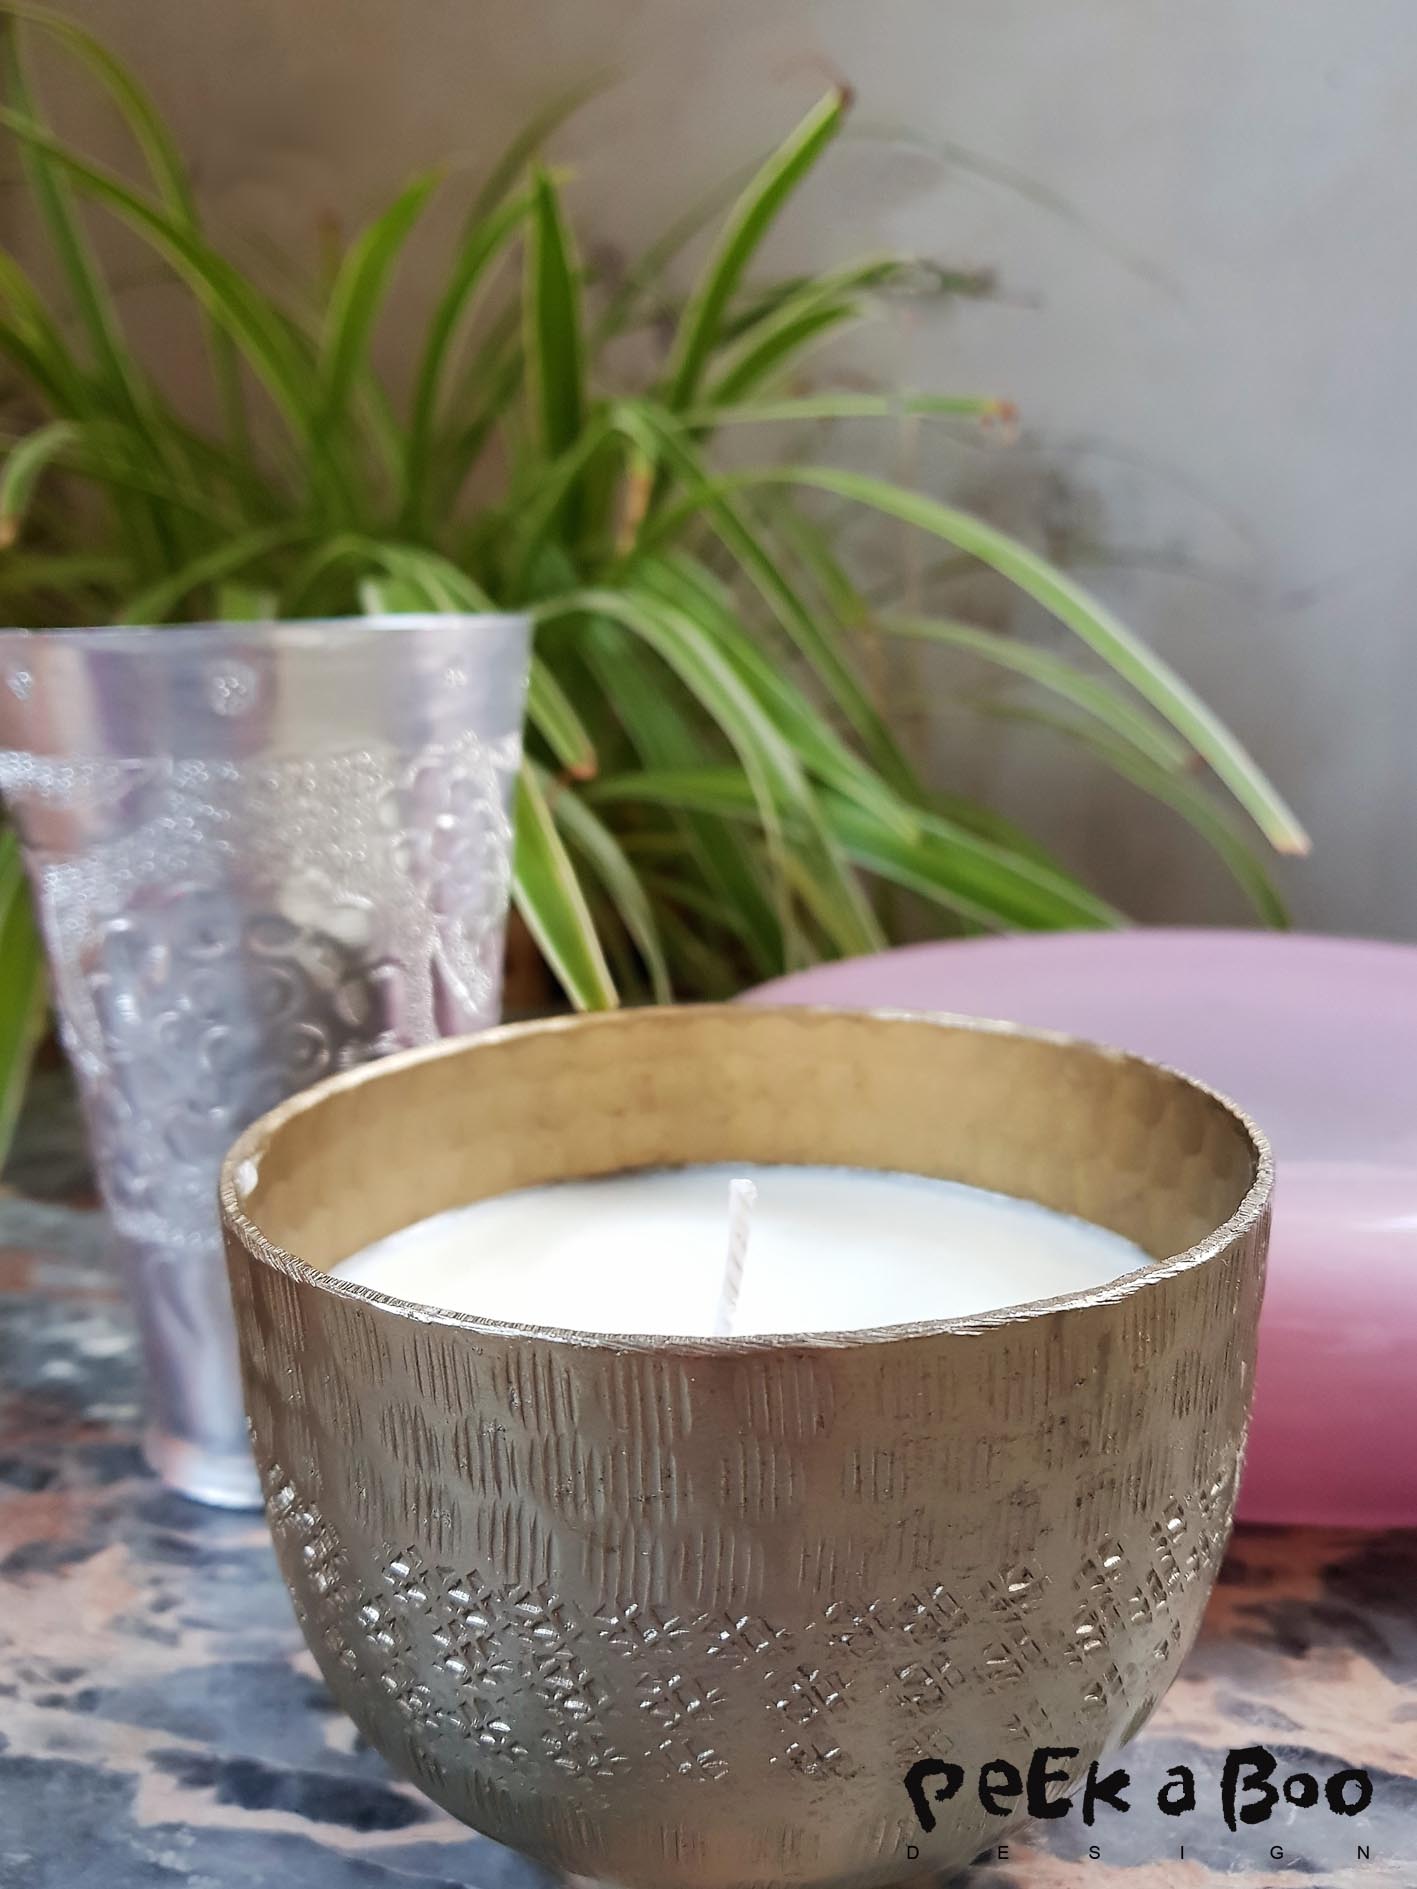 My old Lassi cup and indian bowl, now works as light containers in a very decorative way...I love their new function.